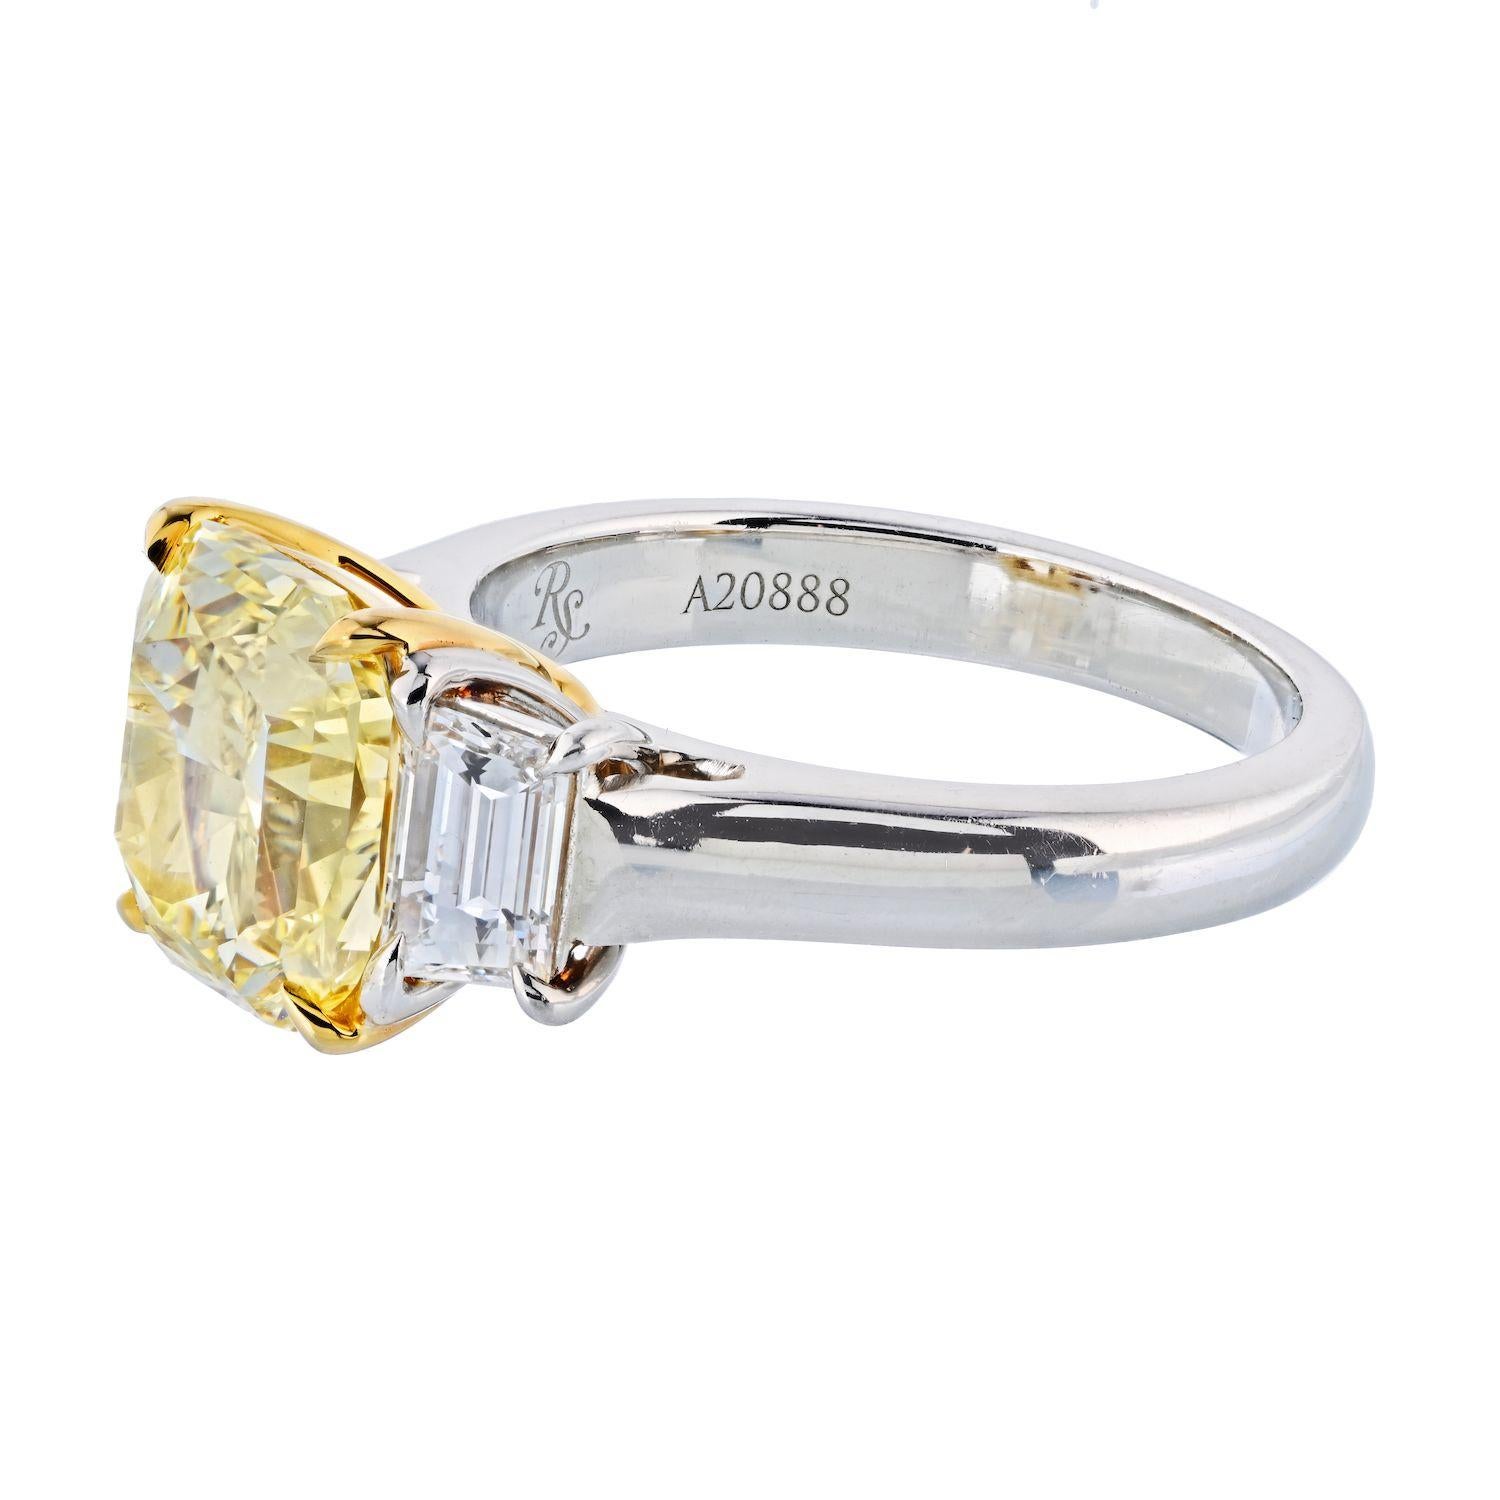 3.21 Ct Radiant Cut Platinum Fancy Yellow Three Stone Diamond Engagement Ring In New Condition For Sale In New York, NY